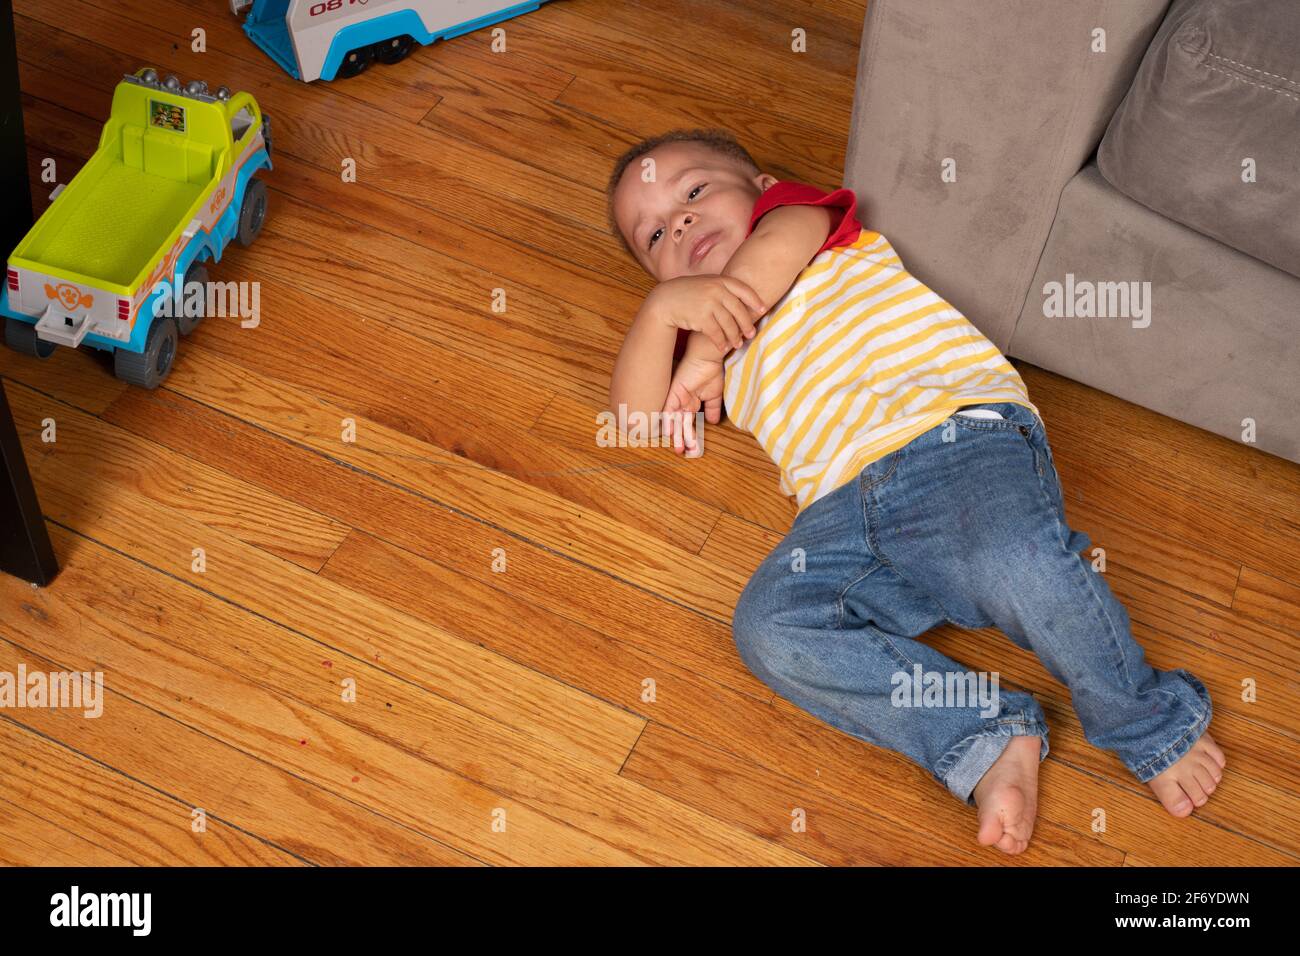 2 year old boy, tired, lying on floor, crying, tantrum Stock Photo